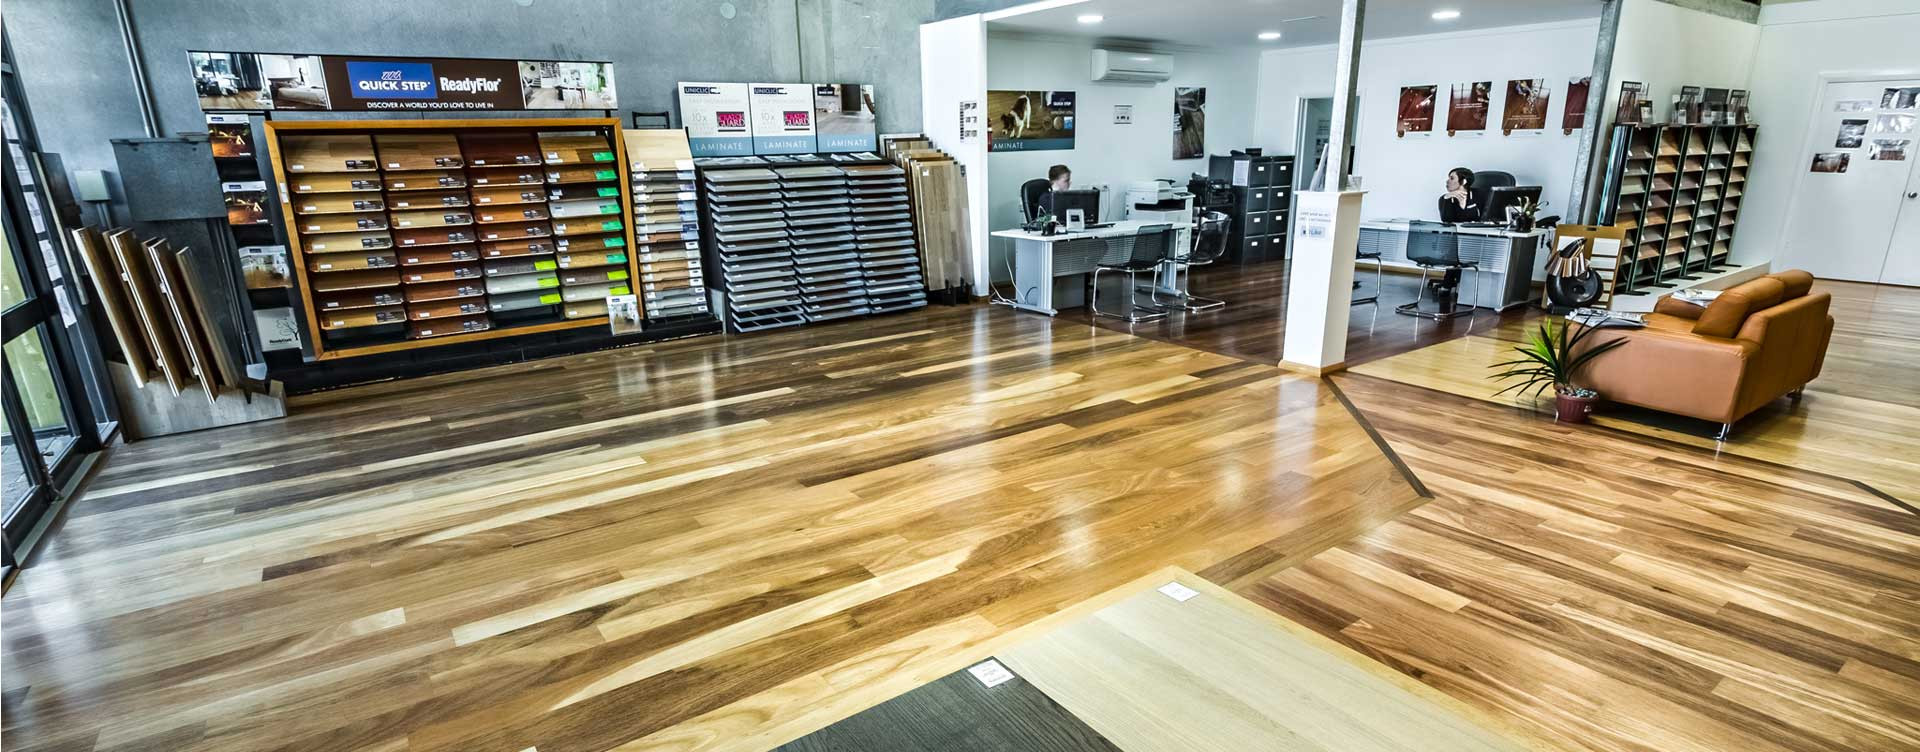 11 Recommended Spotted Gum Hardwood Flooring Prices 2024 free download spotted gum hardwood flooring prices of timber flooring perth coastal flooring wa quality wooden intended for thats why they call us the home of fine wood floors